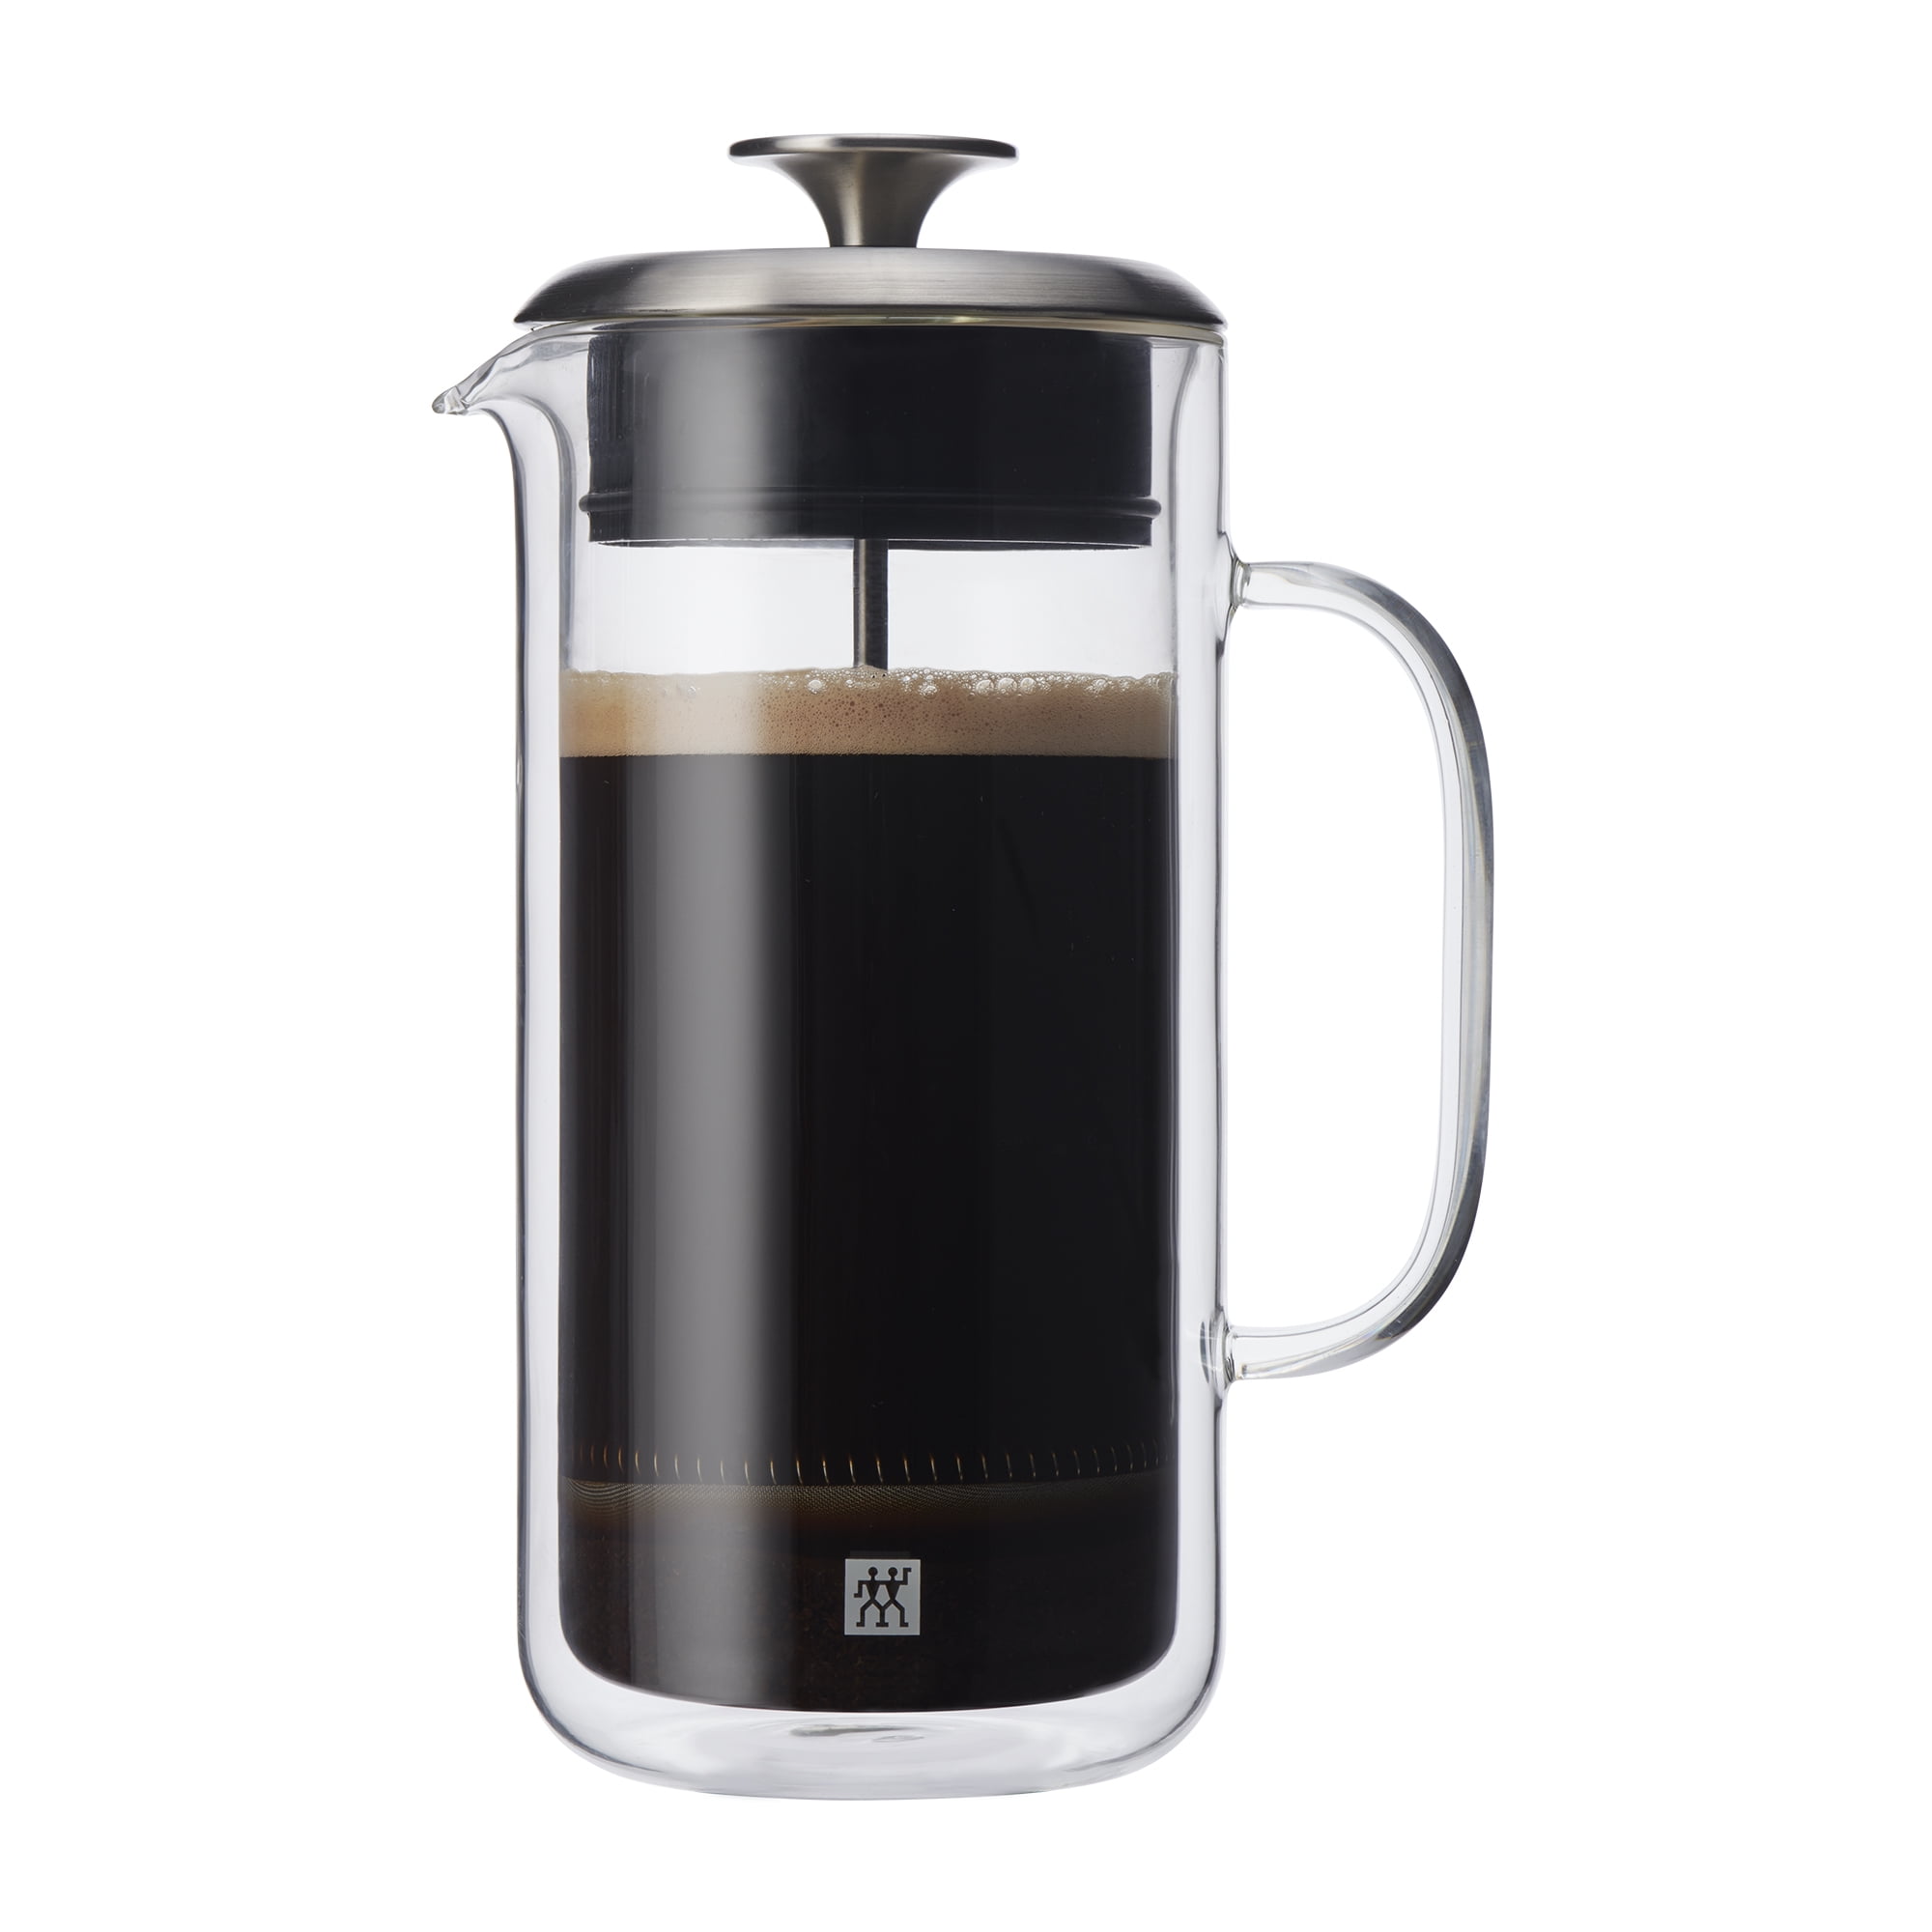 WORBIC French Press, 12oz Double-Wall Insulated French Press Coffee Maker, French Press Stainless Steel with 3 Level Filtration System and 3 Extra